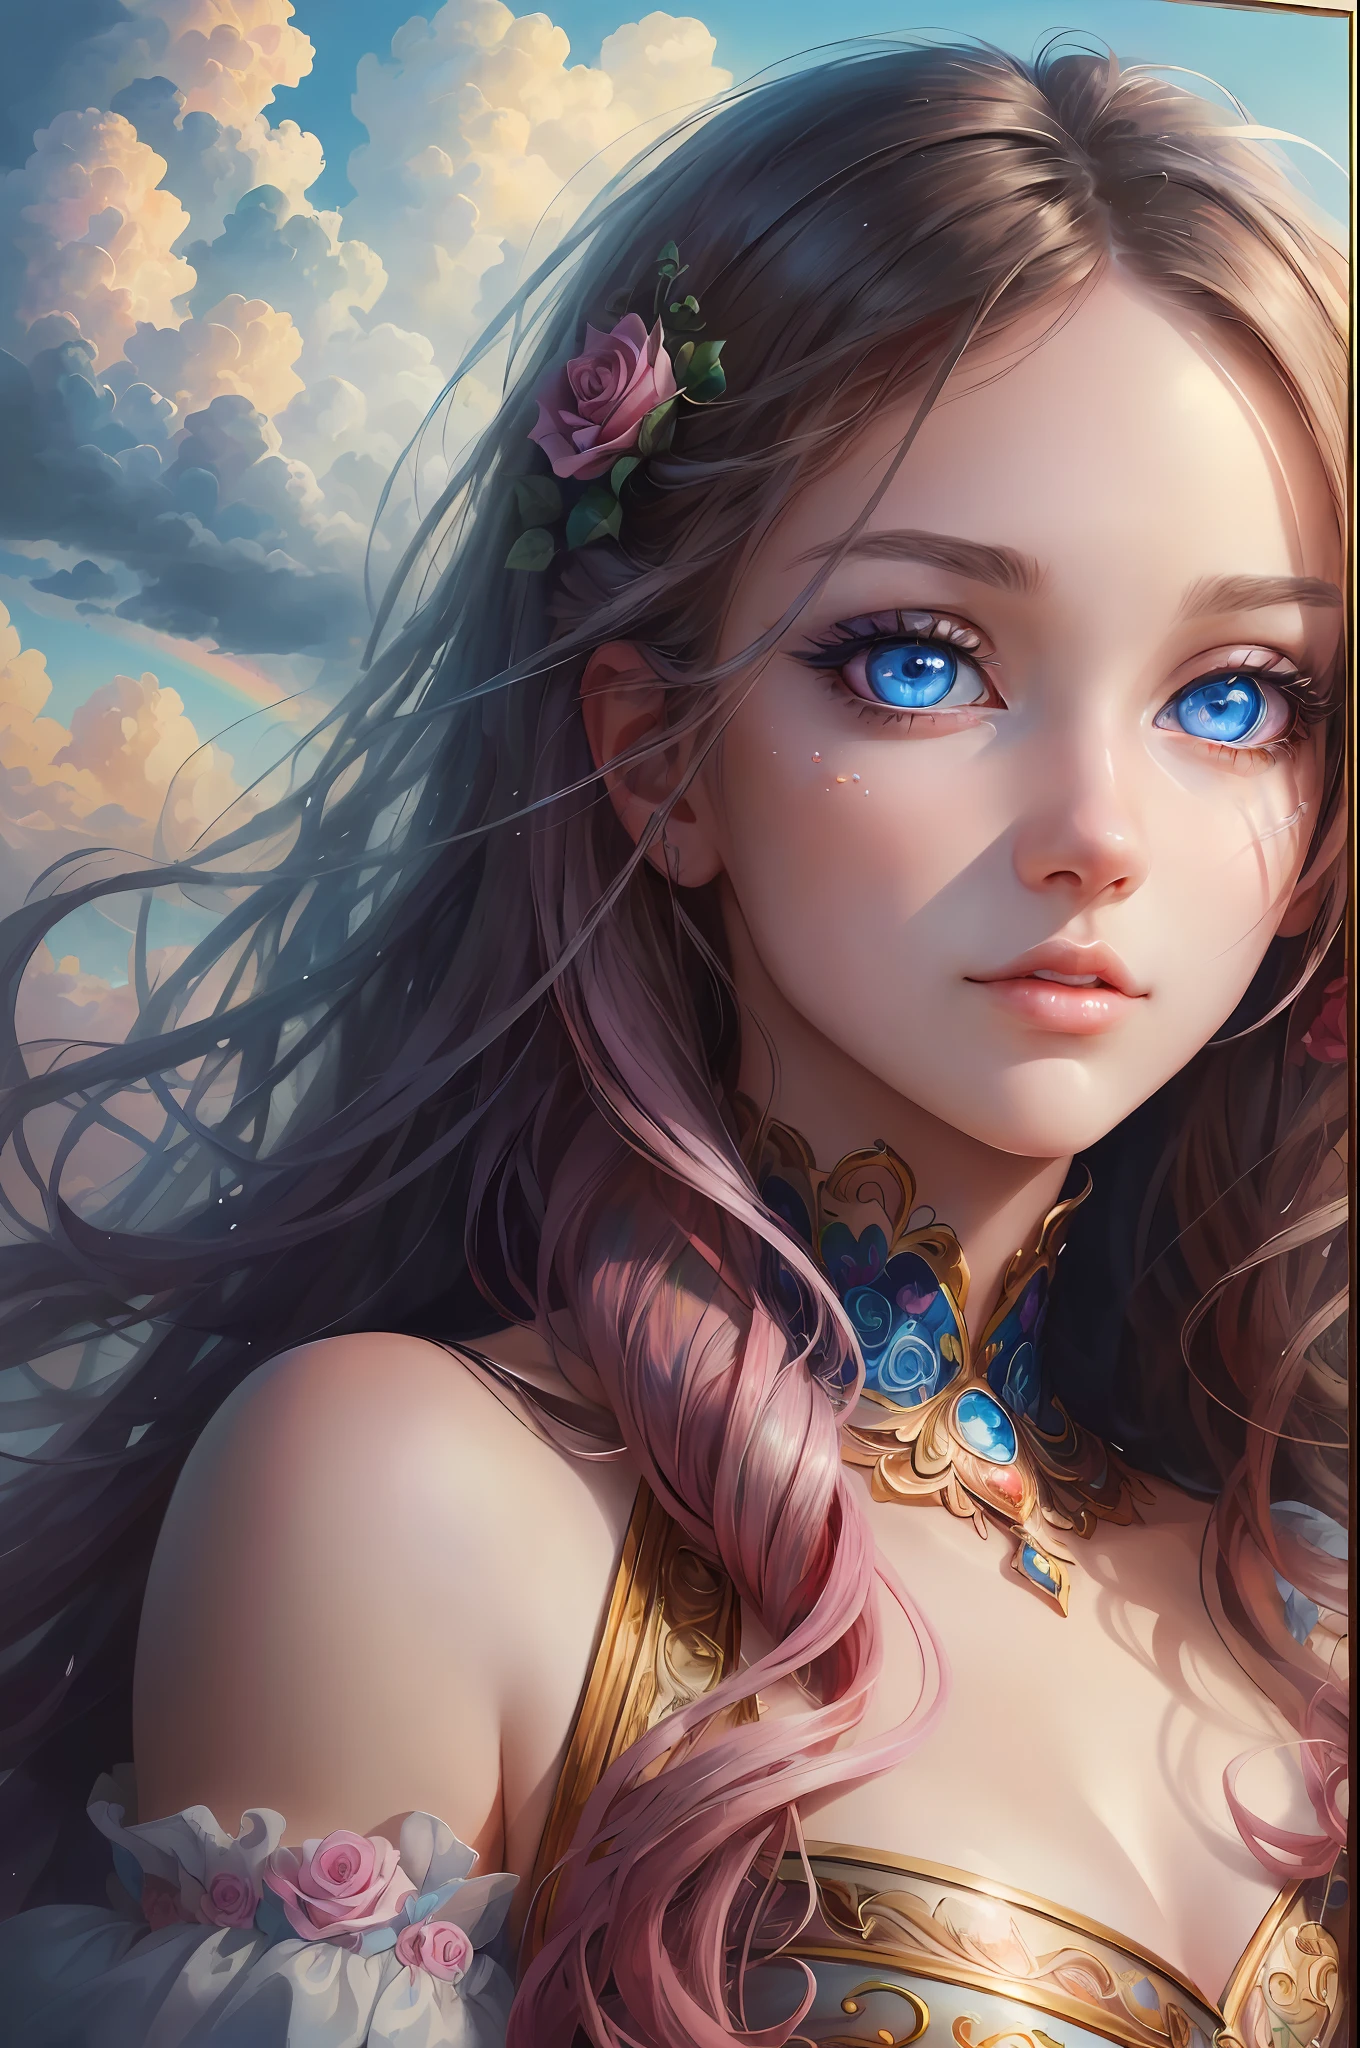 ( Absurd, High quality, ultra-detailed, masterpiece, concept art, smooth, highly detailed artwork, hyper-realistic painting )beautiful eyes(eyes detailed),1 pretty girl, Rose with pink, yellow, and blue color, Rainbow in sky, long hair, dreamy, clouds, Vivid, cute and fantasy, whole body